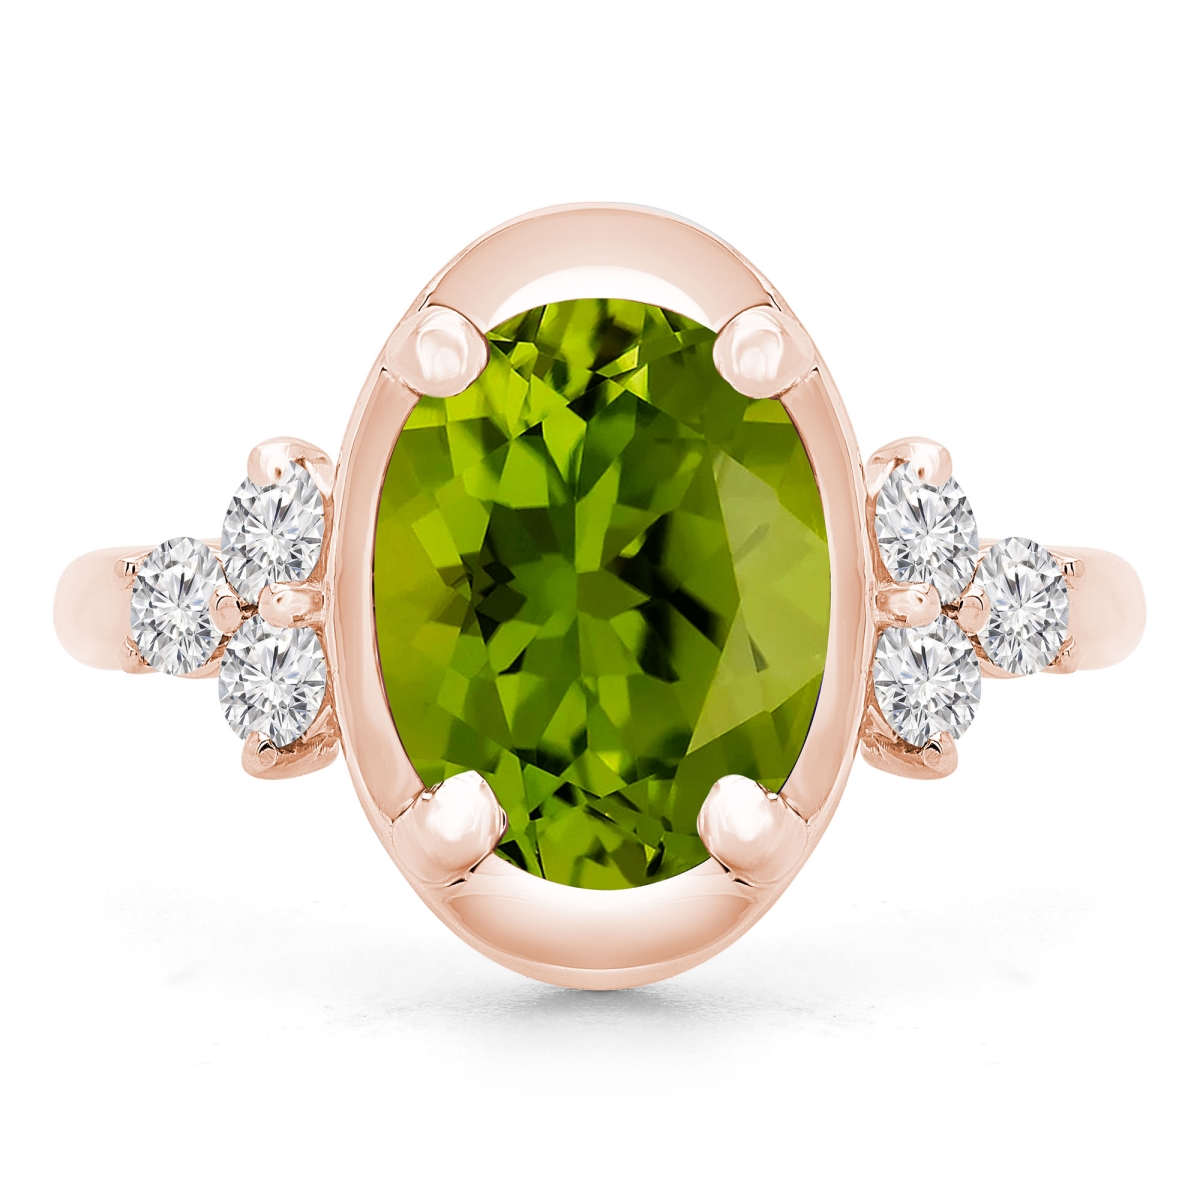 Picture of Majesty Diamonds MD190412-4.5 3.9 CTW Oval Green Peridot Cocktail Ring in 14K Rose Gold - Size 4.5